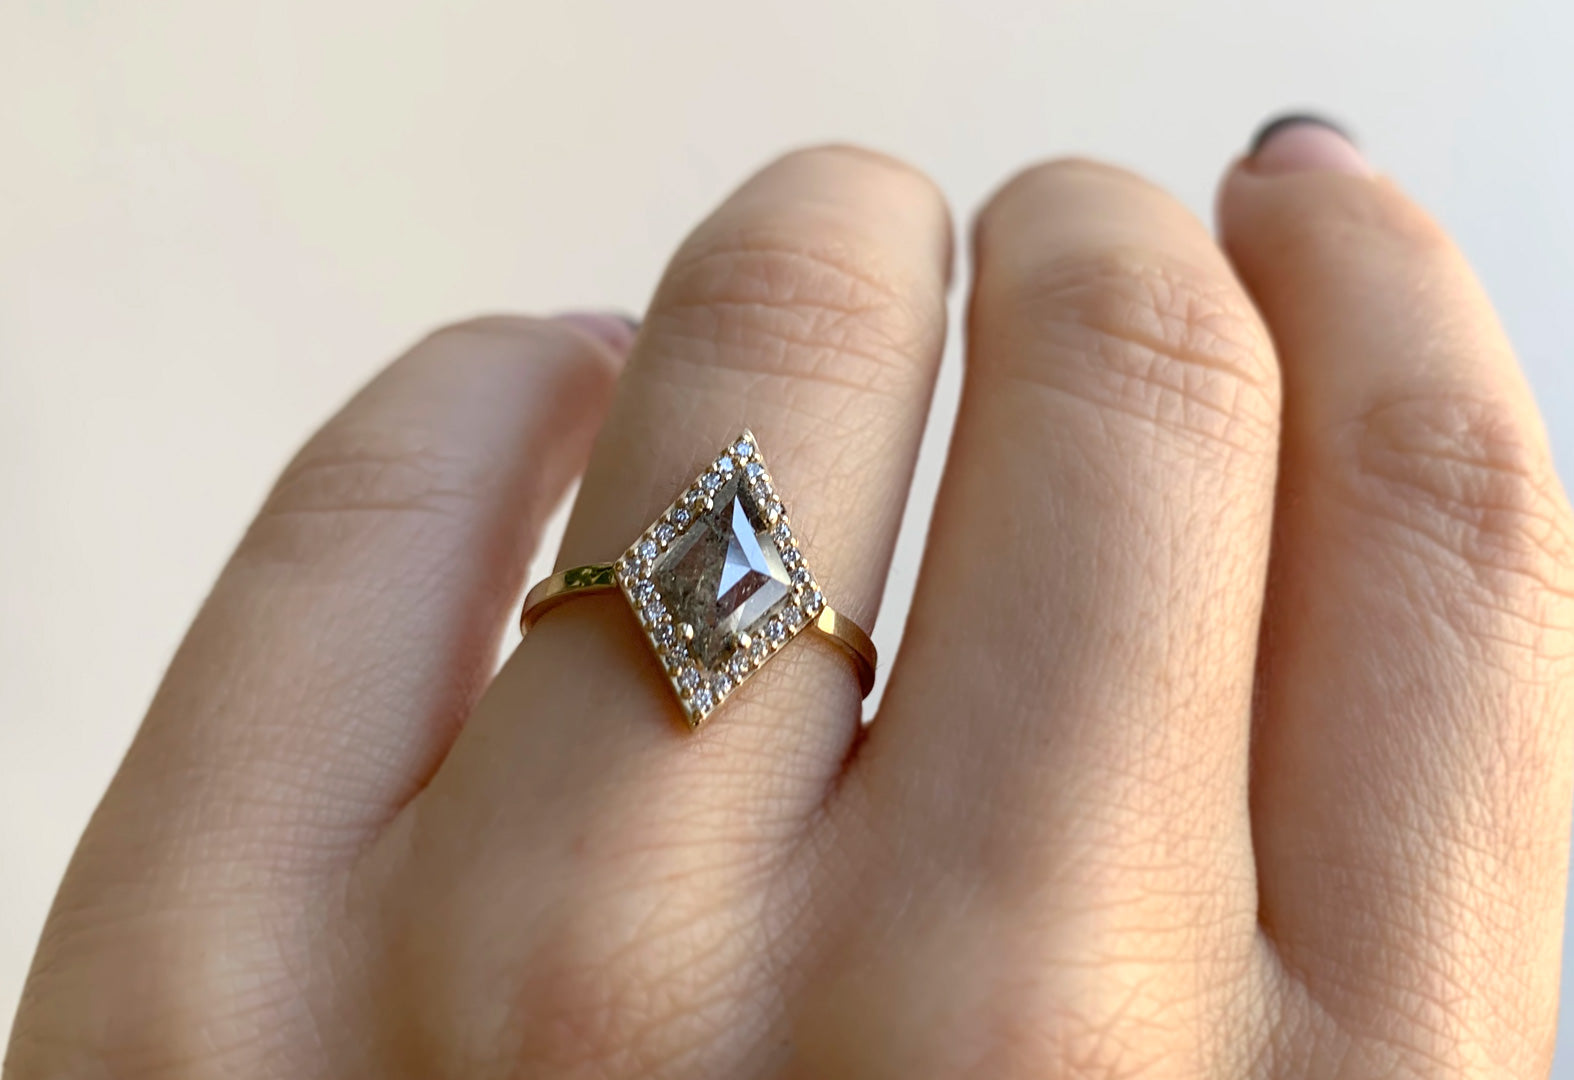 Step Cut Kite-Shaped Diamond Engagement Ring with Halo & Alexis Russell